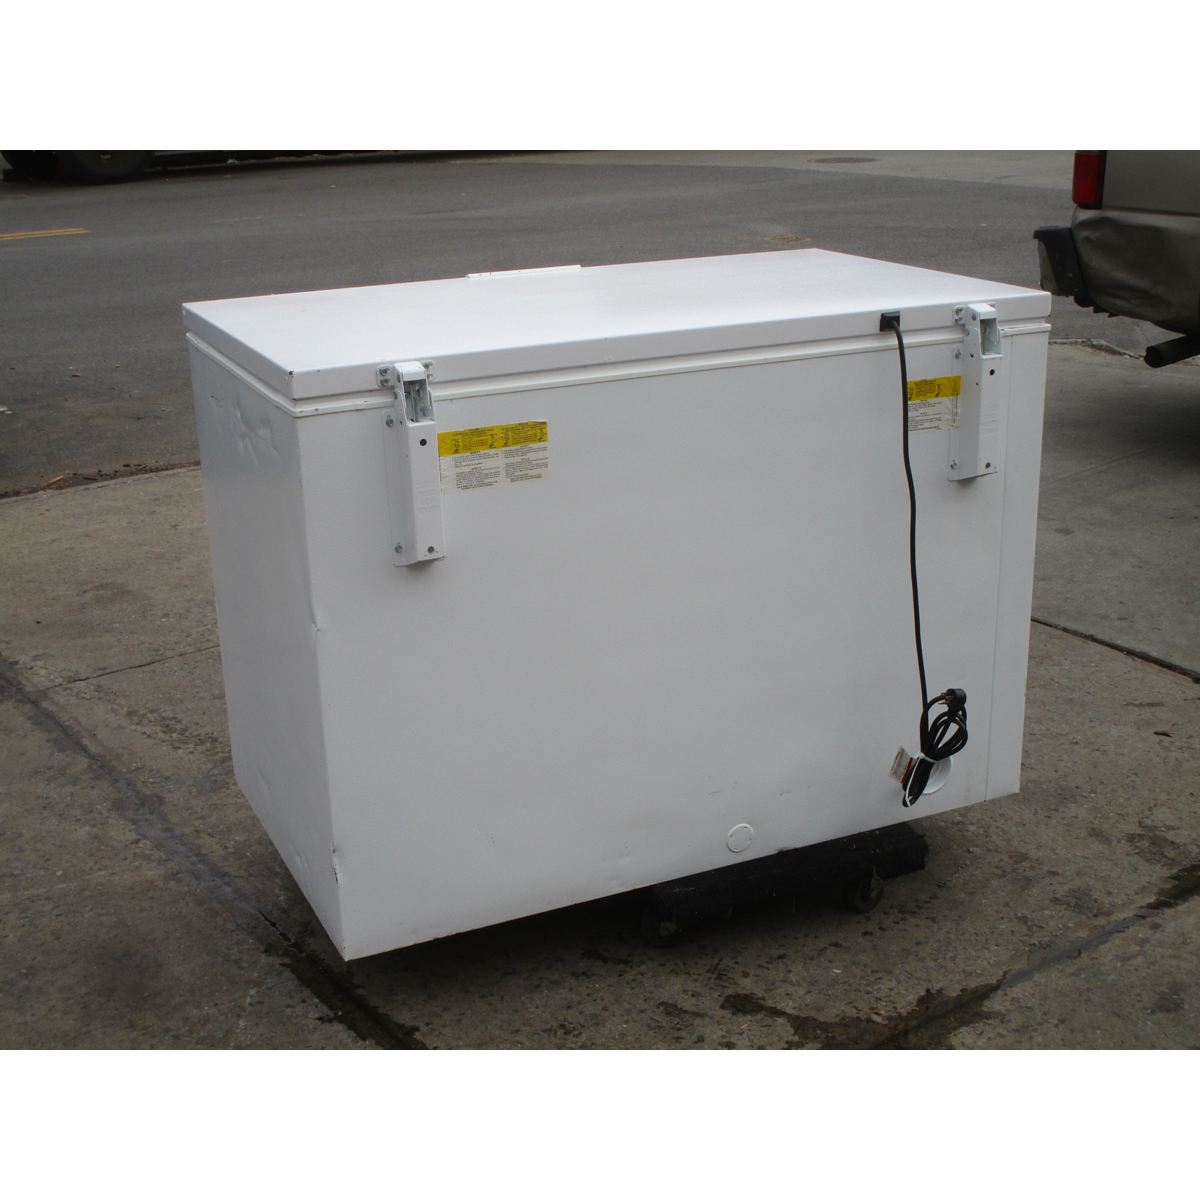 GE FCM15PUBWW Chest Freezer 14.8 Cu. Ft., Used Great Condition image 3